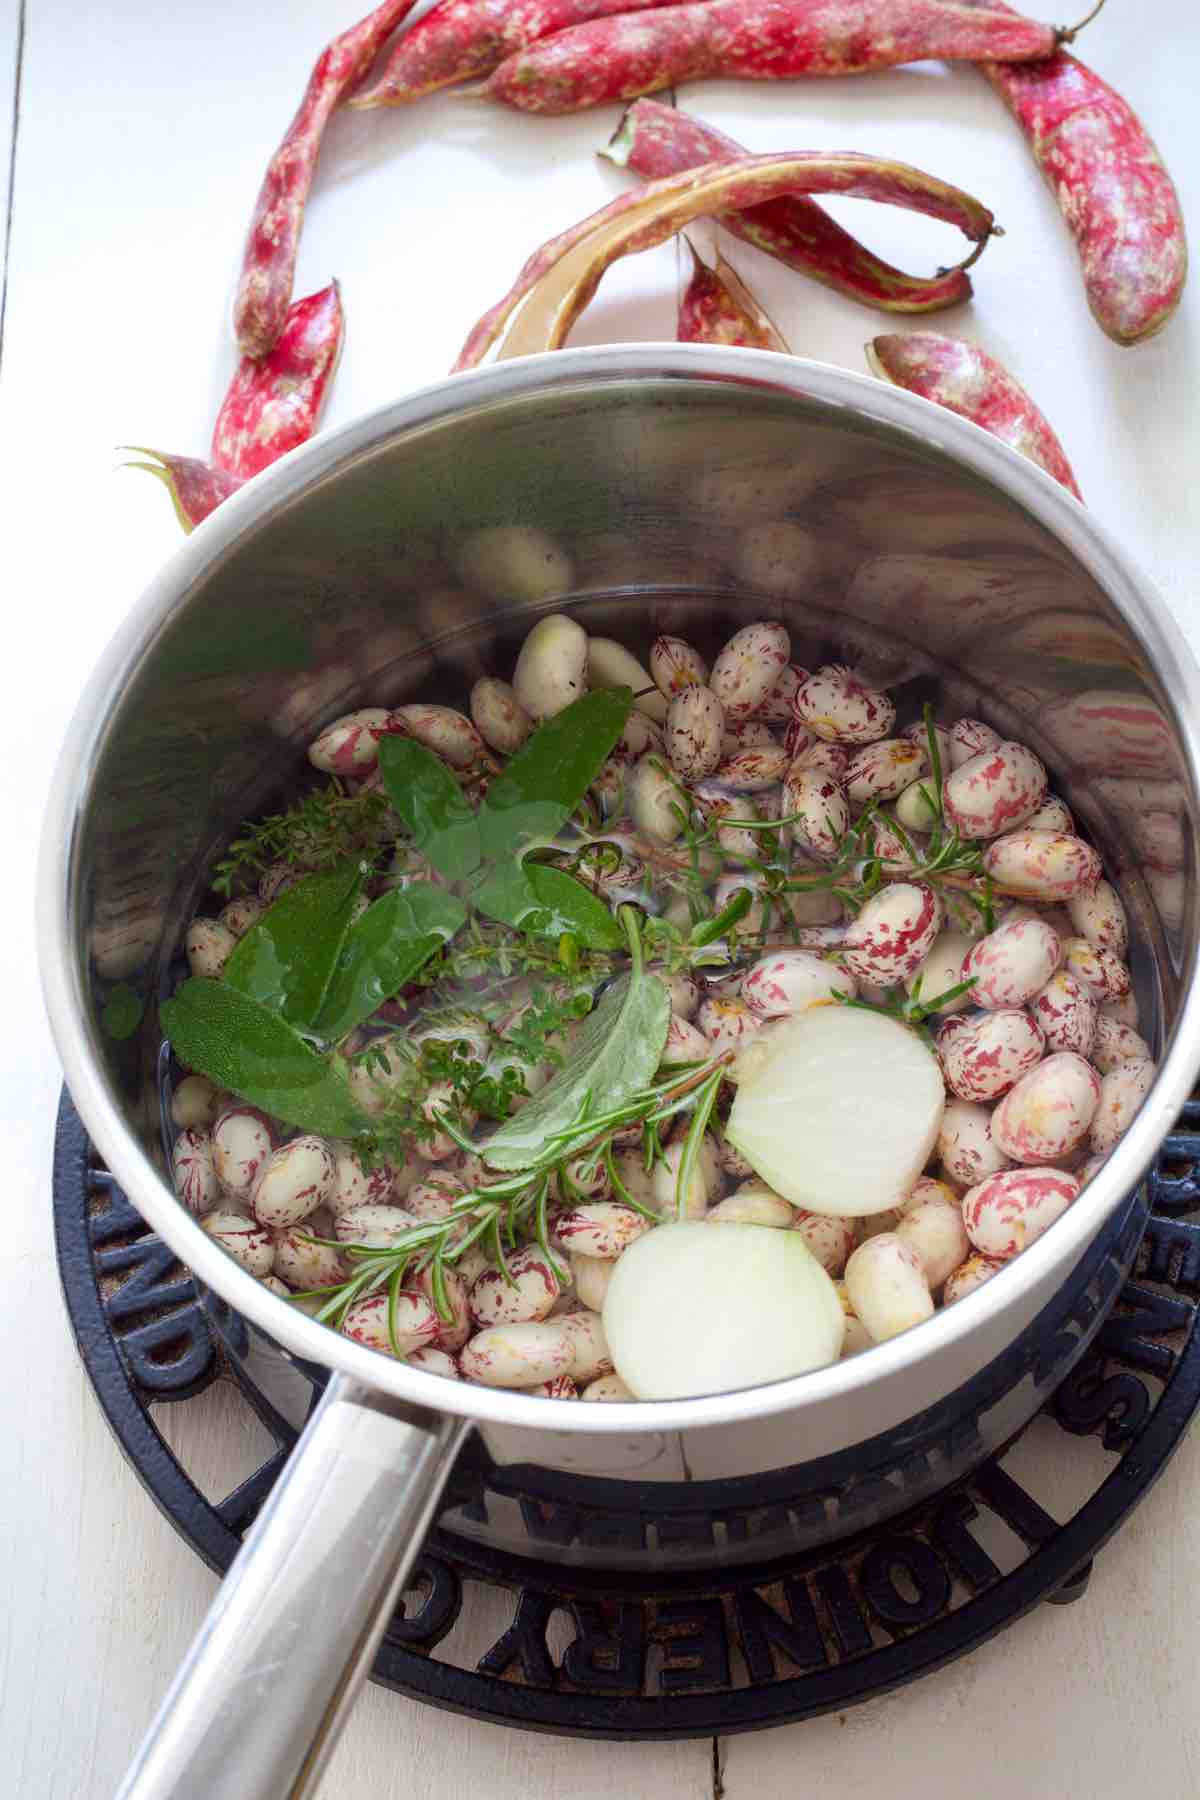 Borlotti beans in a pan with water and aromatics before cooking.